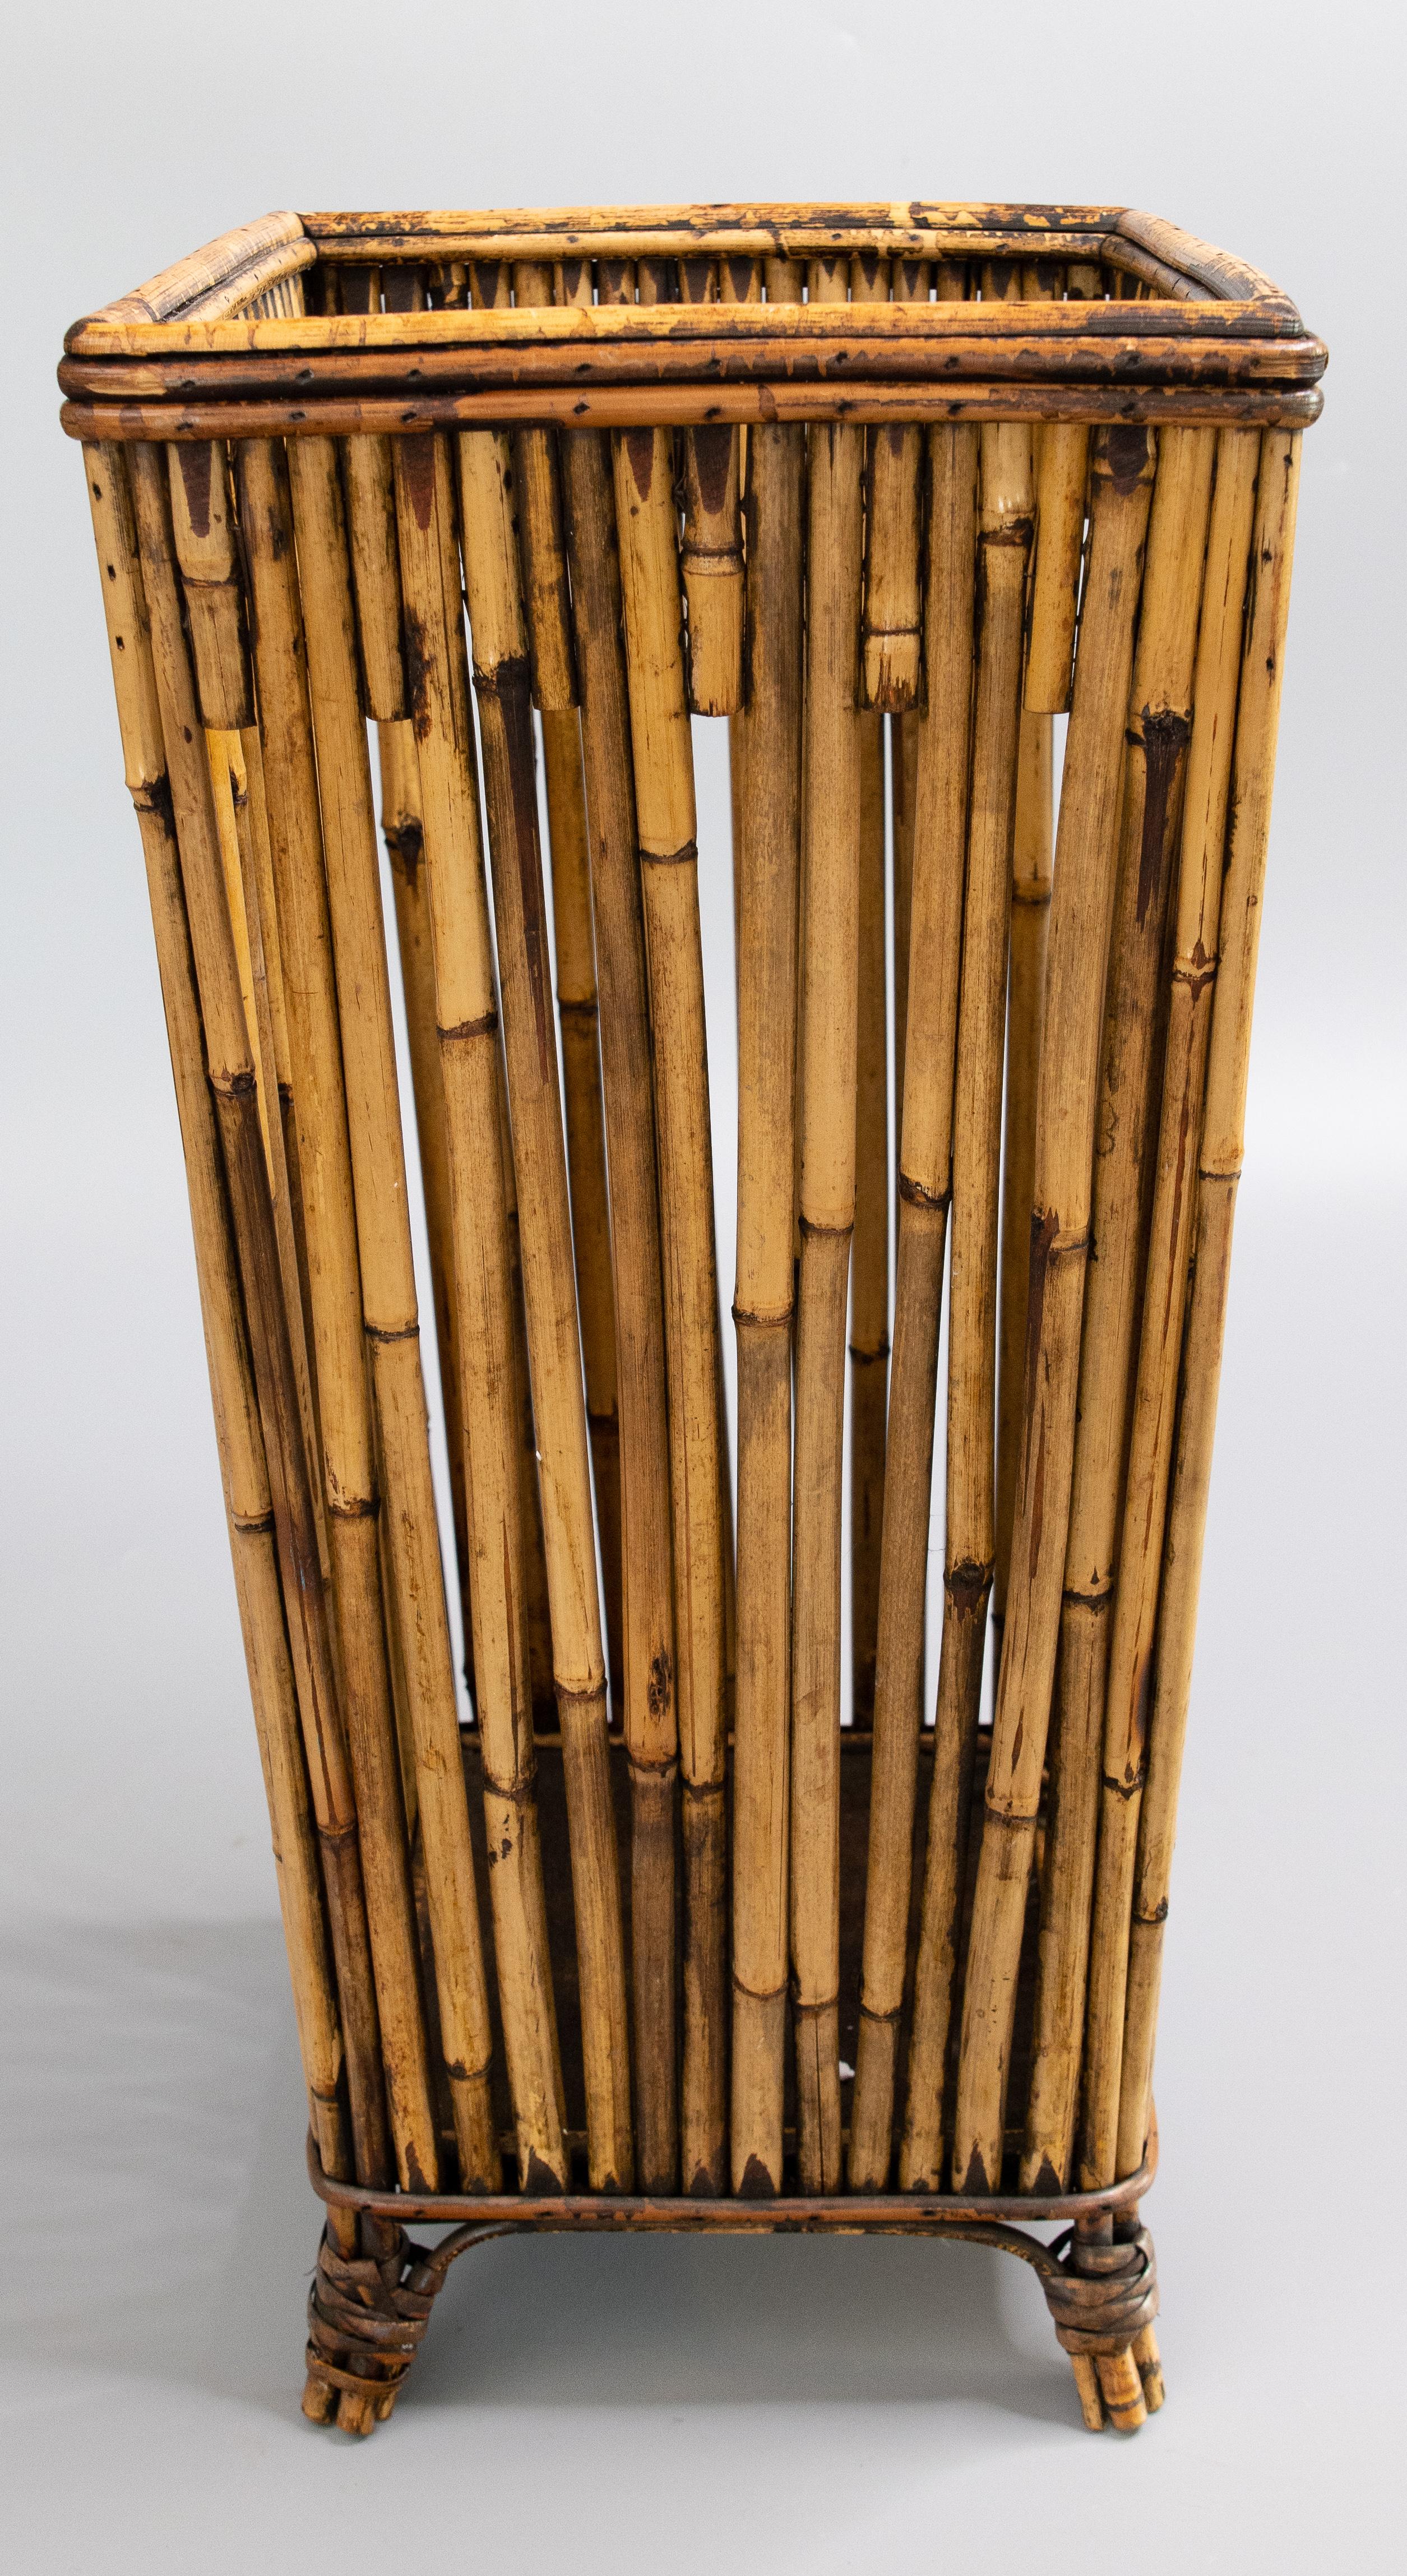 A fabulous Mid-Century bamboo and rattan footed umbrella or walking stick stand. This chic umbrella stand is well made and sturdy with a stylish Mid-Century Modern design. It would be perfect in an entryway for umbrellas or walking